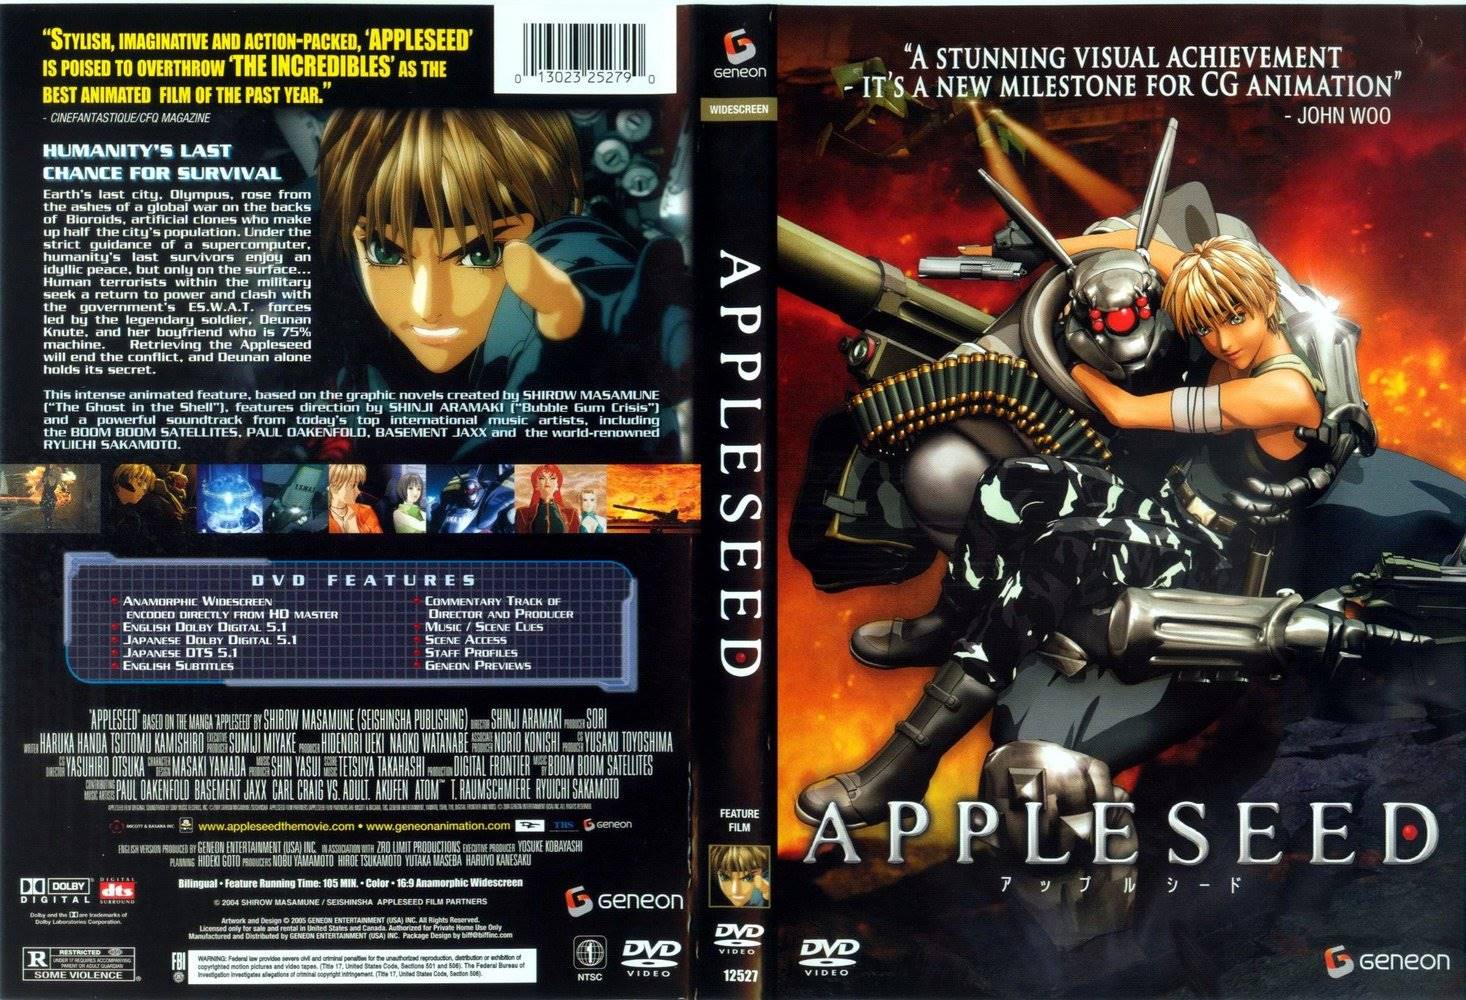 33-facts-about-the-movie-appleseed